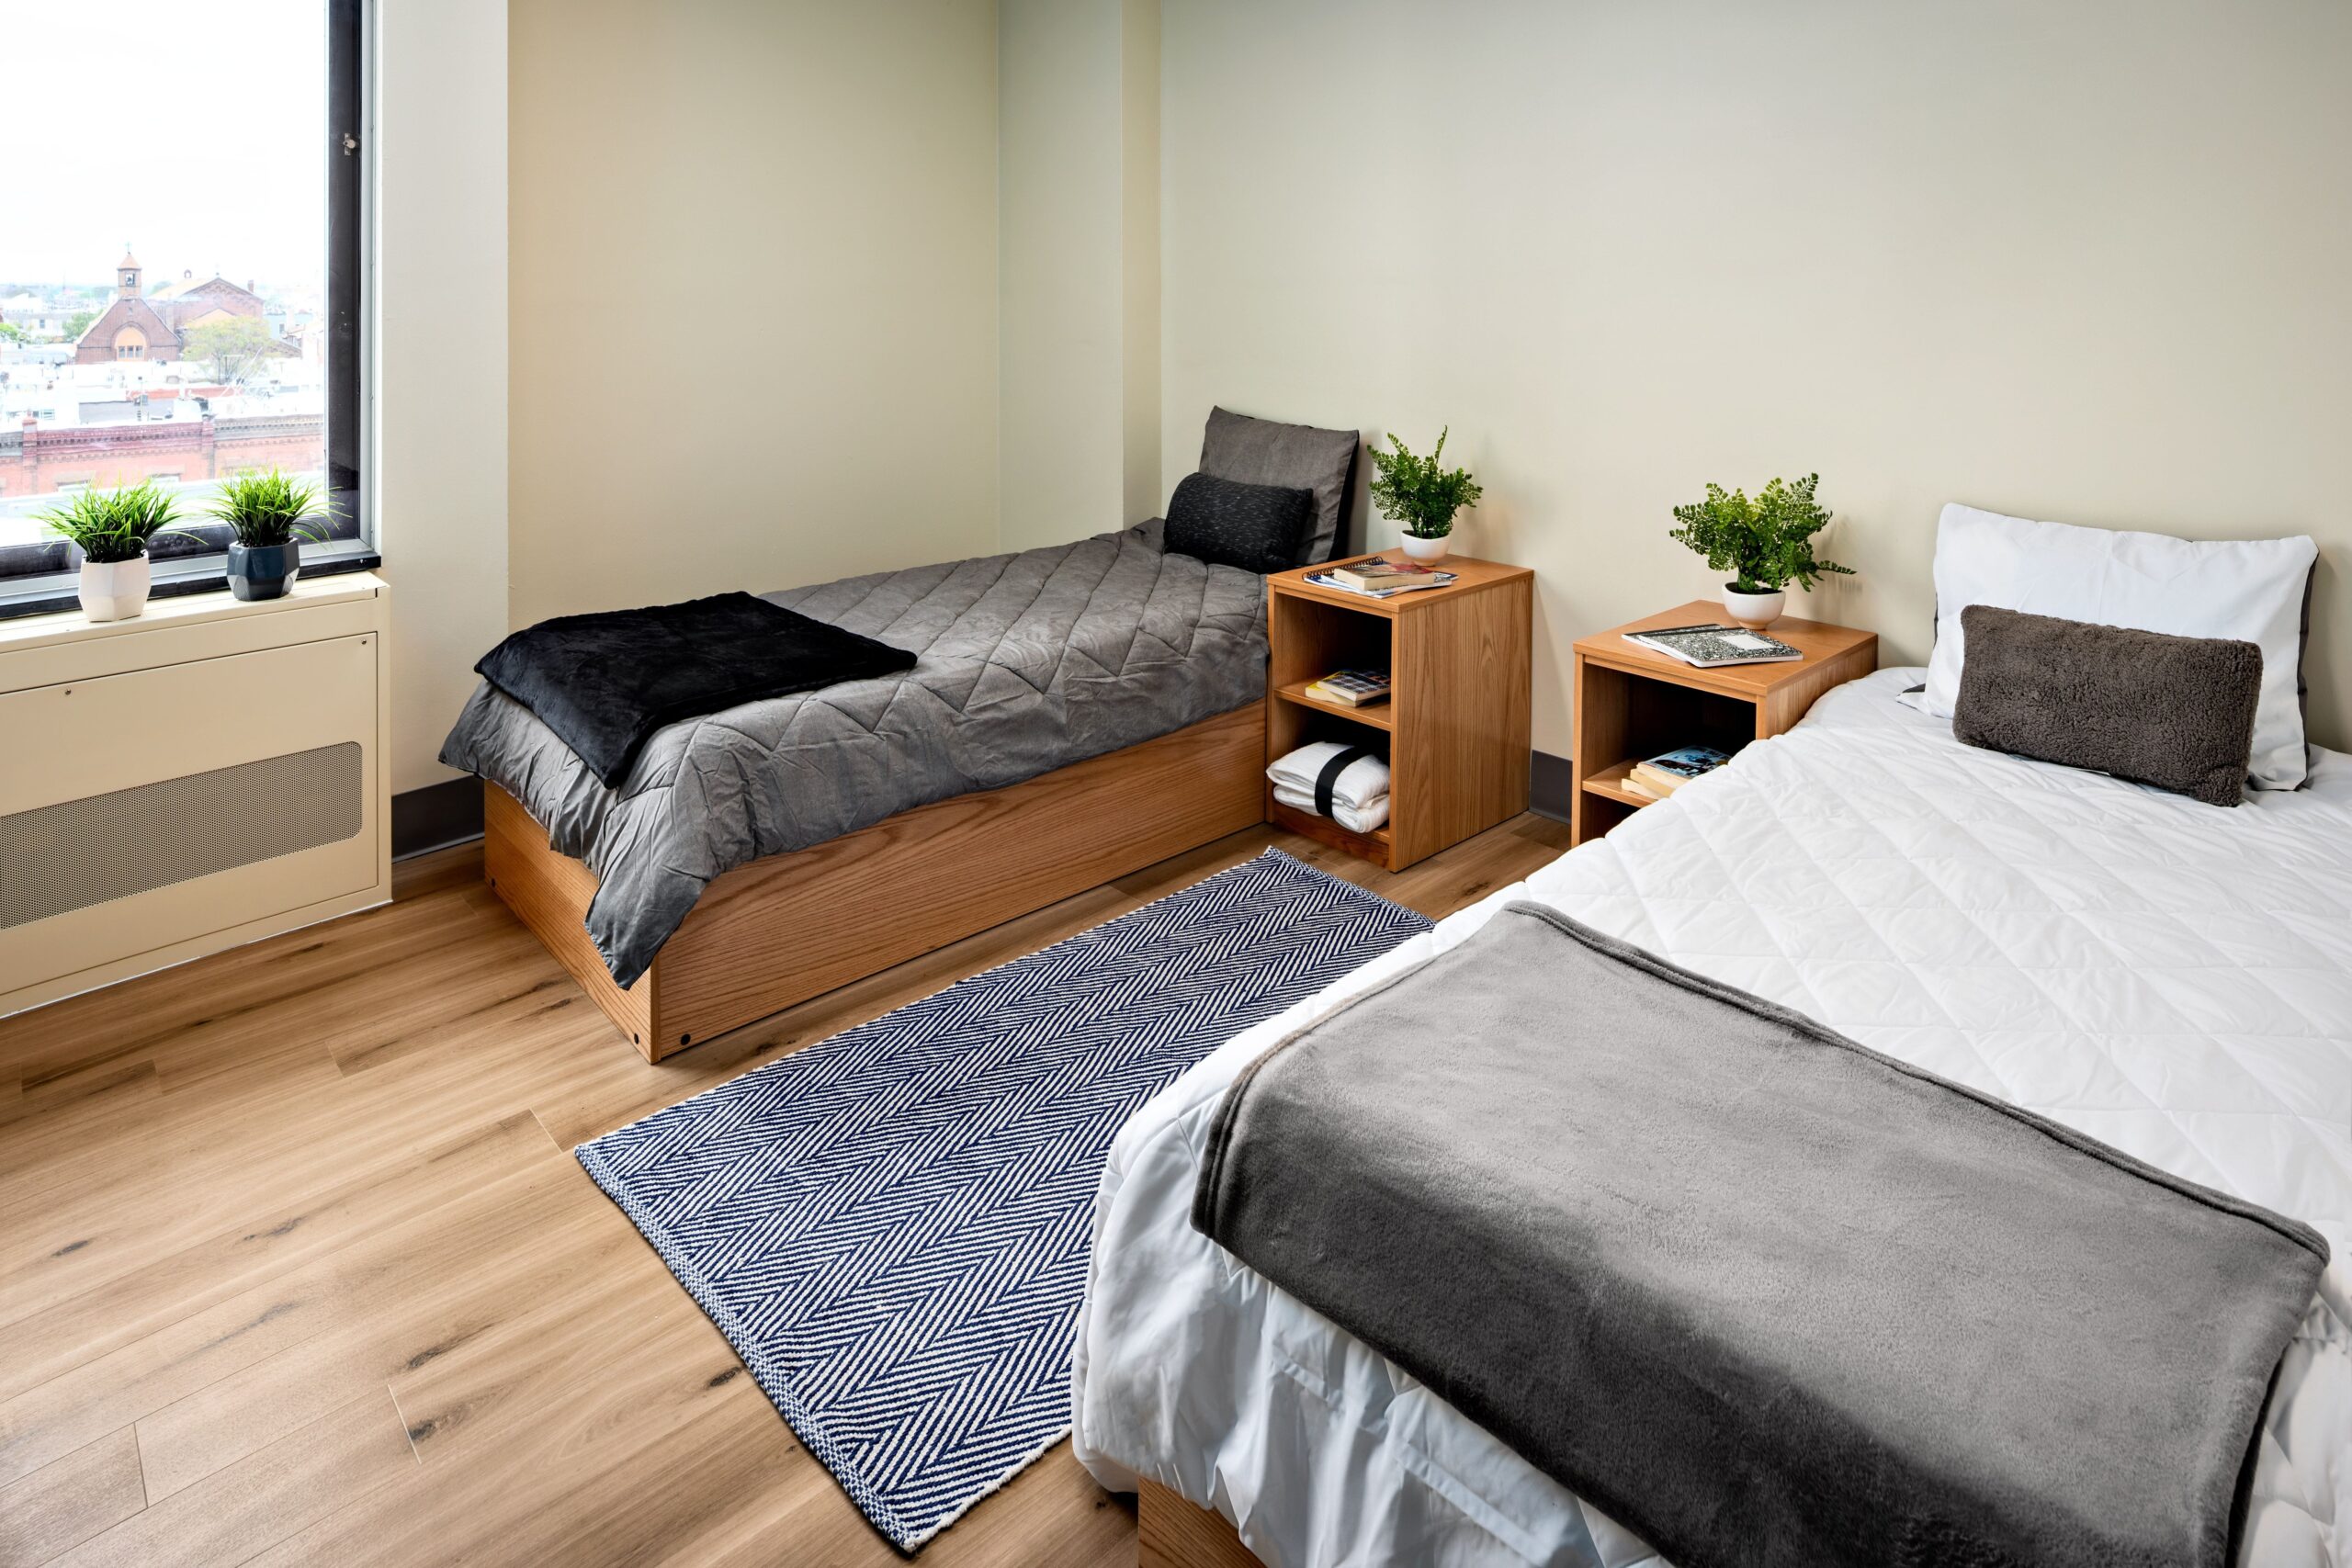 A room with an open window and two single beds for guests or inpatients.